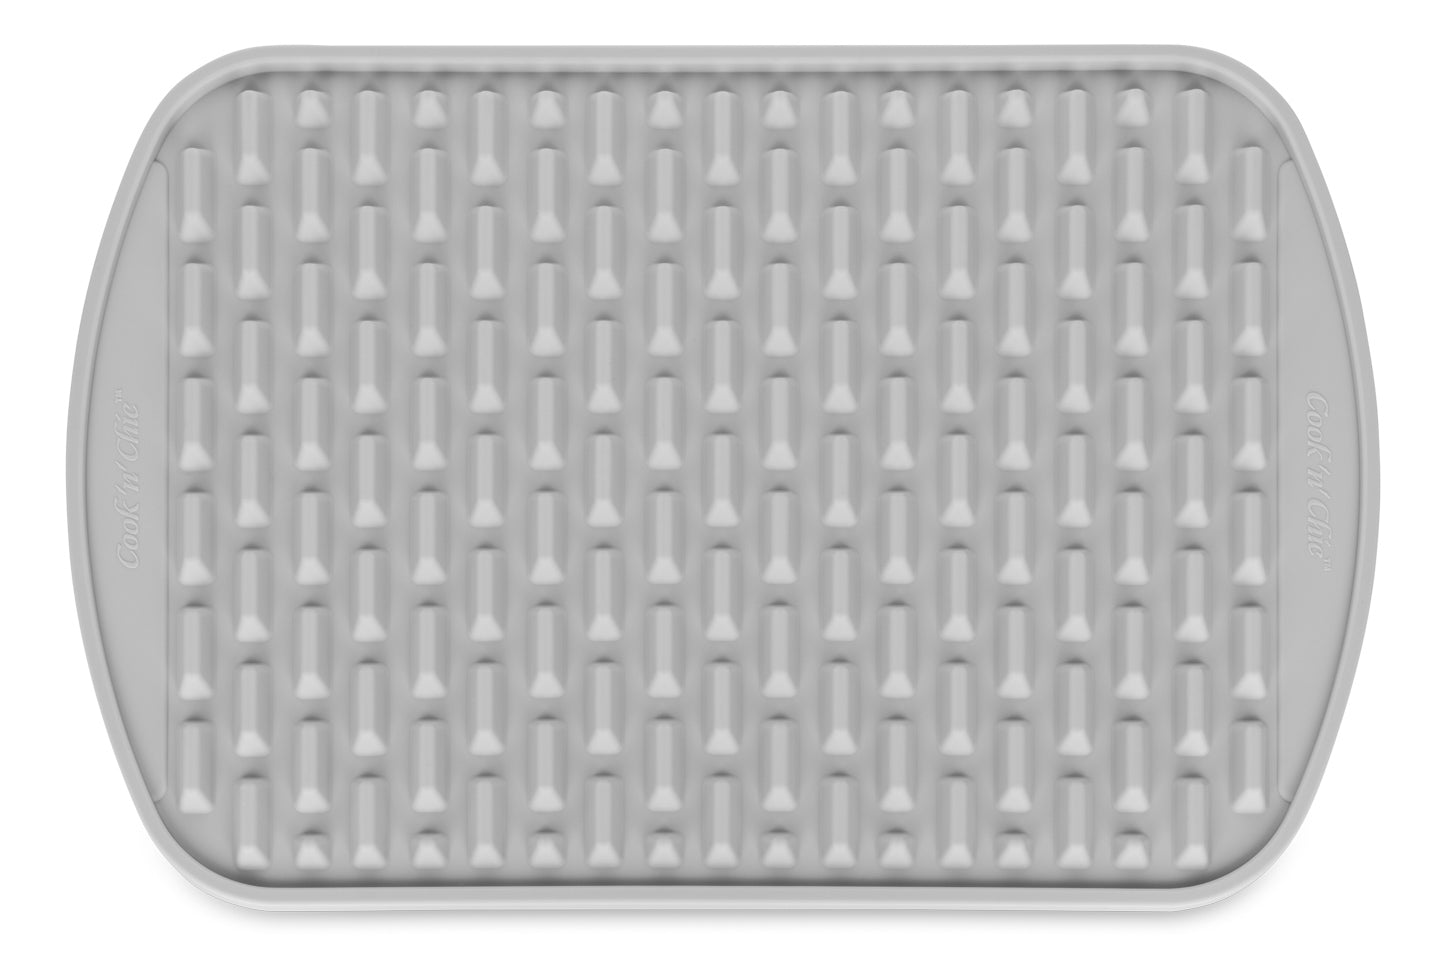 1pc Multi-functional Silicone Kitchen Mat For Drying, Kitchen